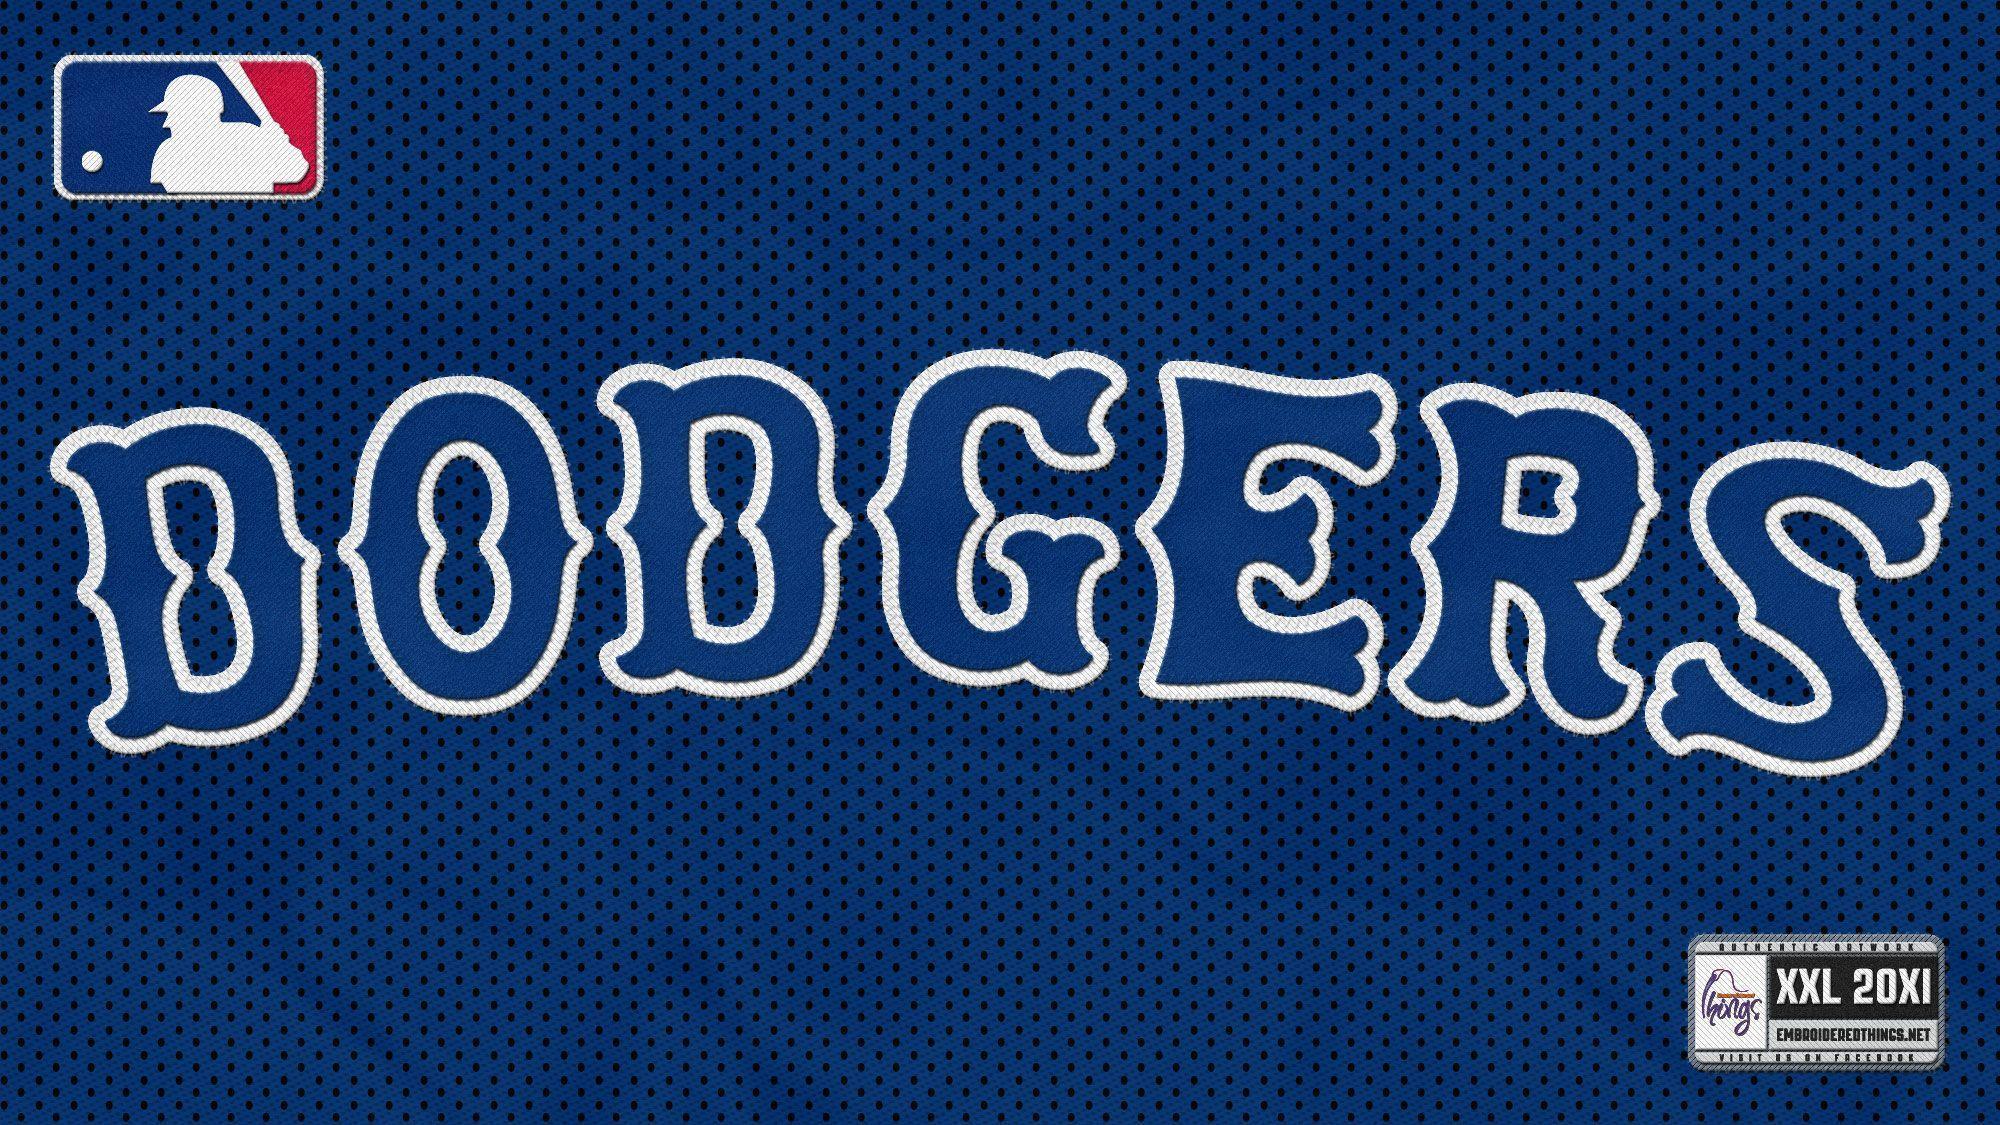 Los Angeles Dodgers wallpapers.